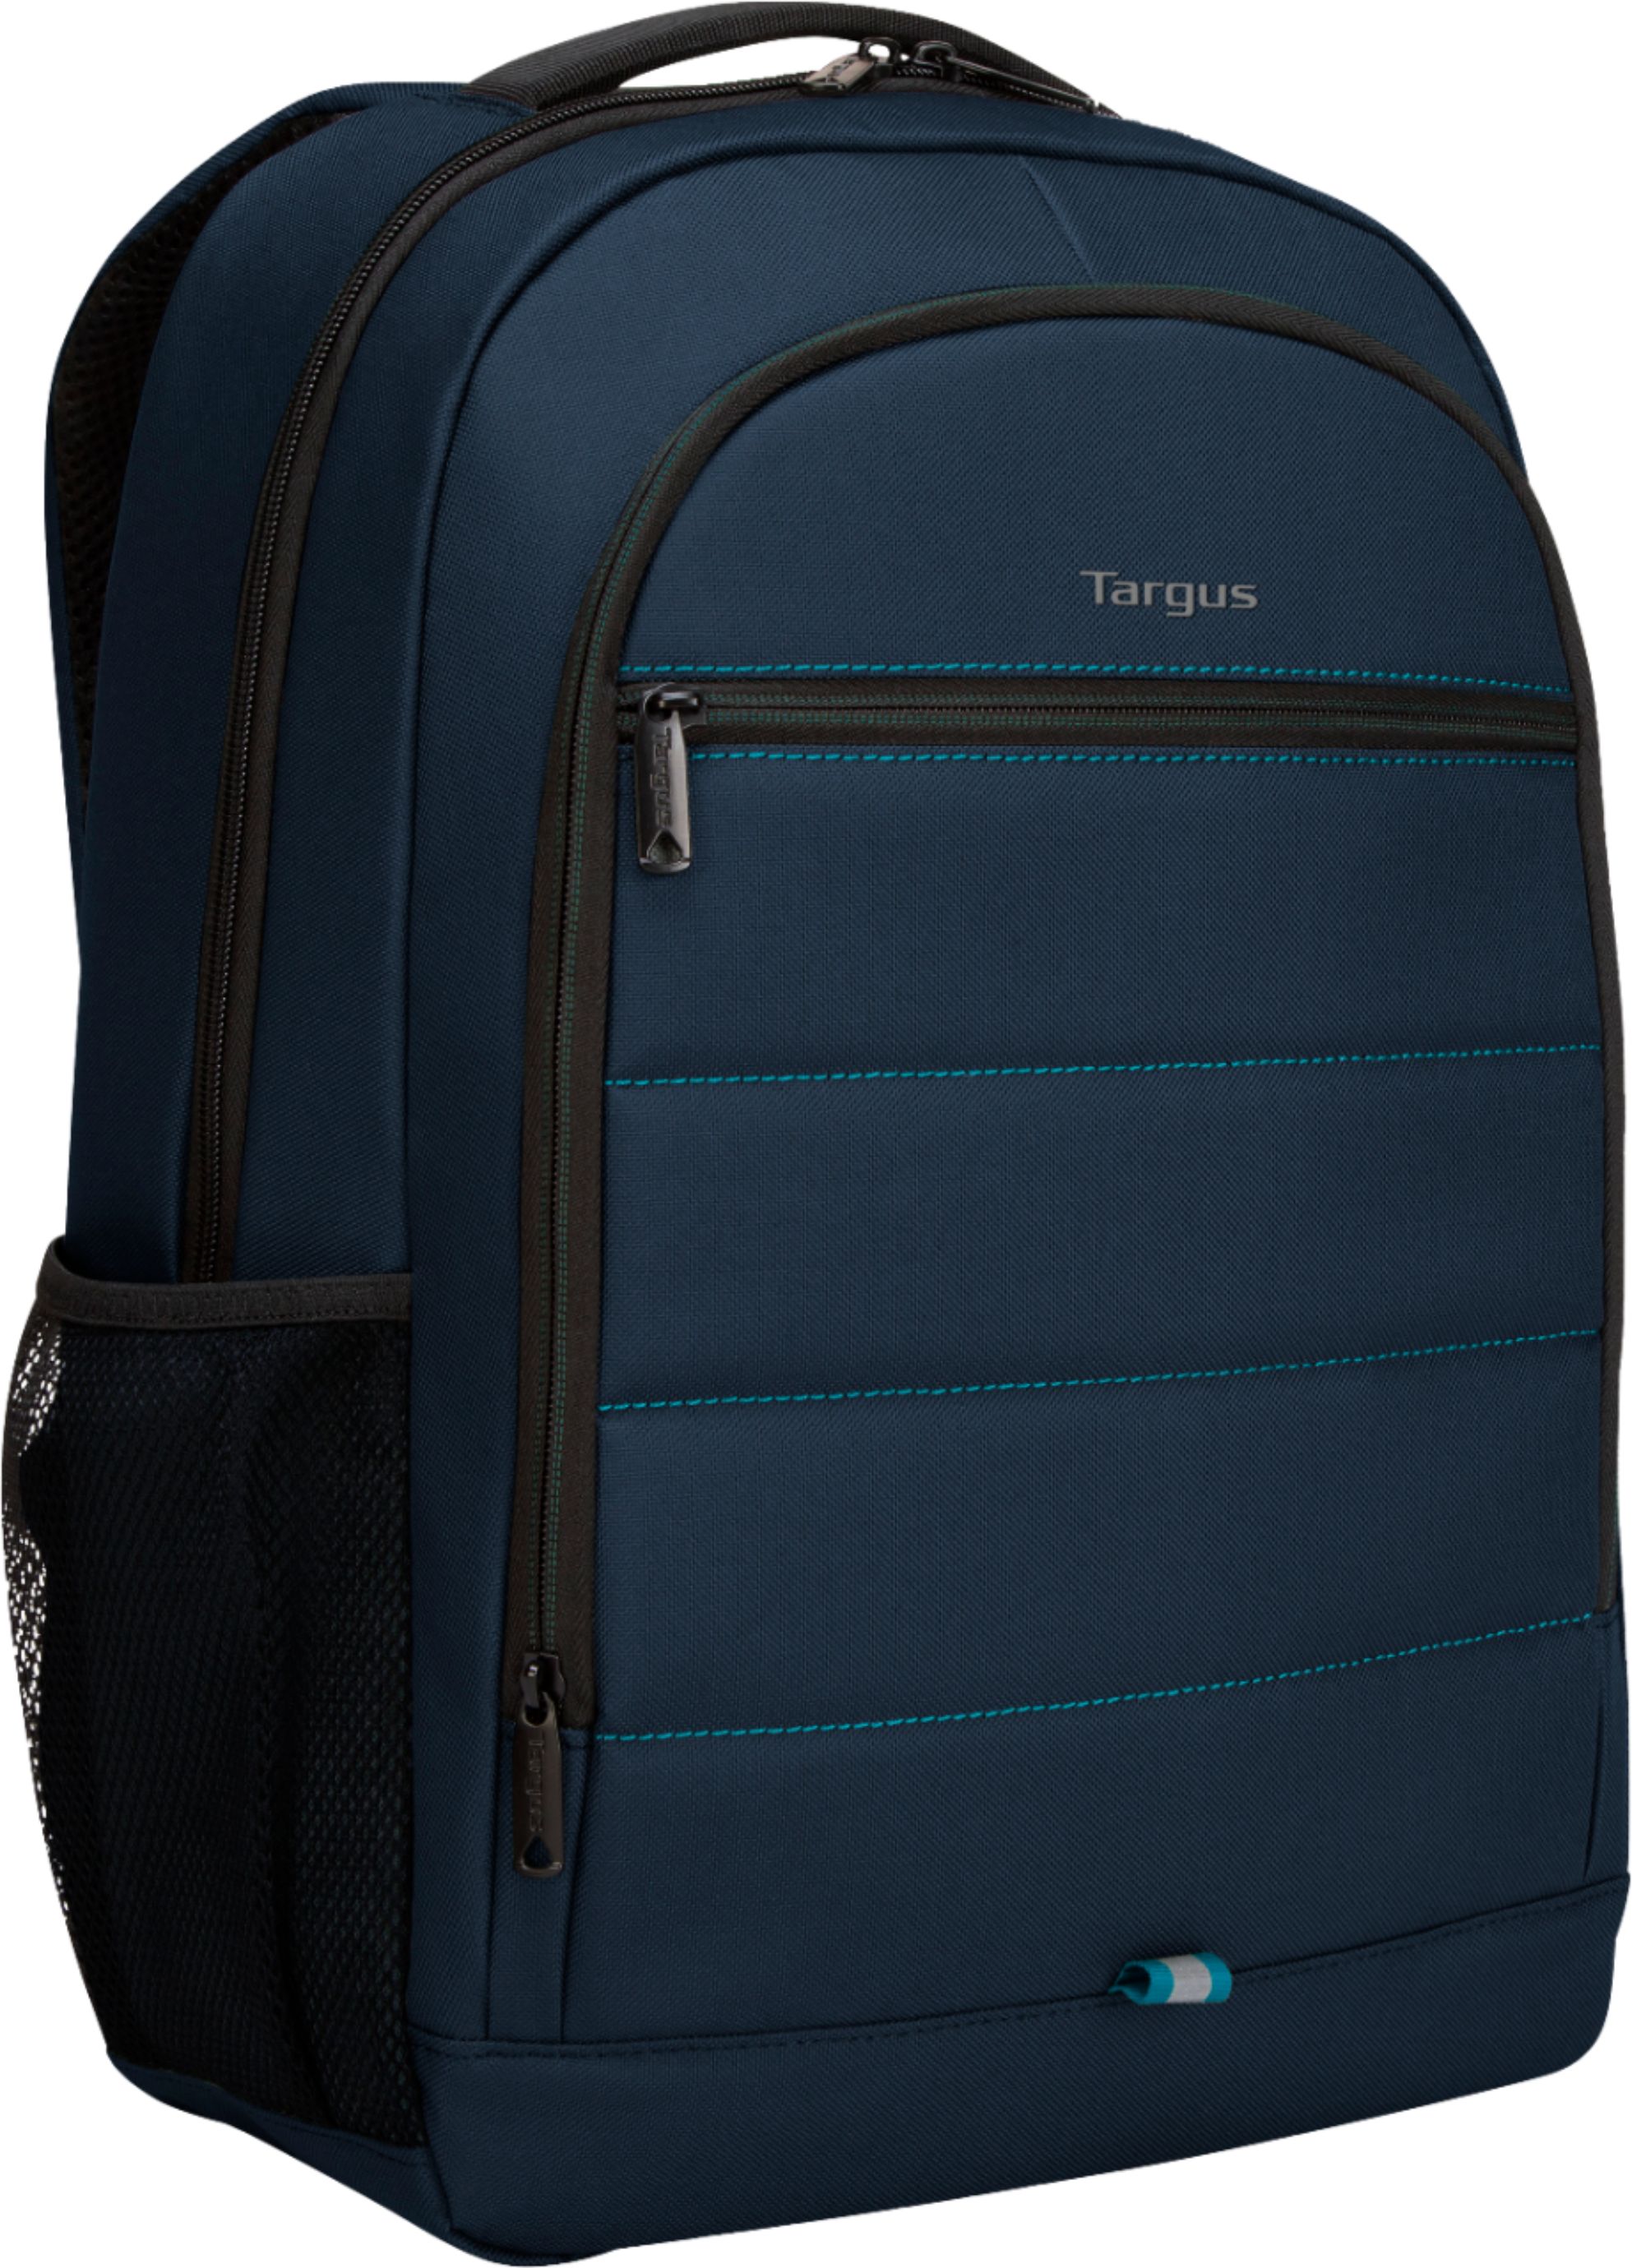 Angle View: Targus - Octave Backpack for 15.6” Laptops - Blue